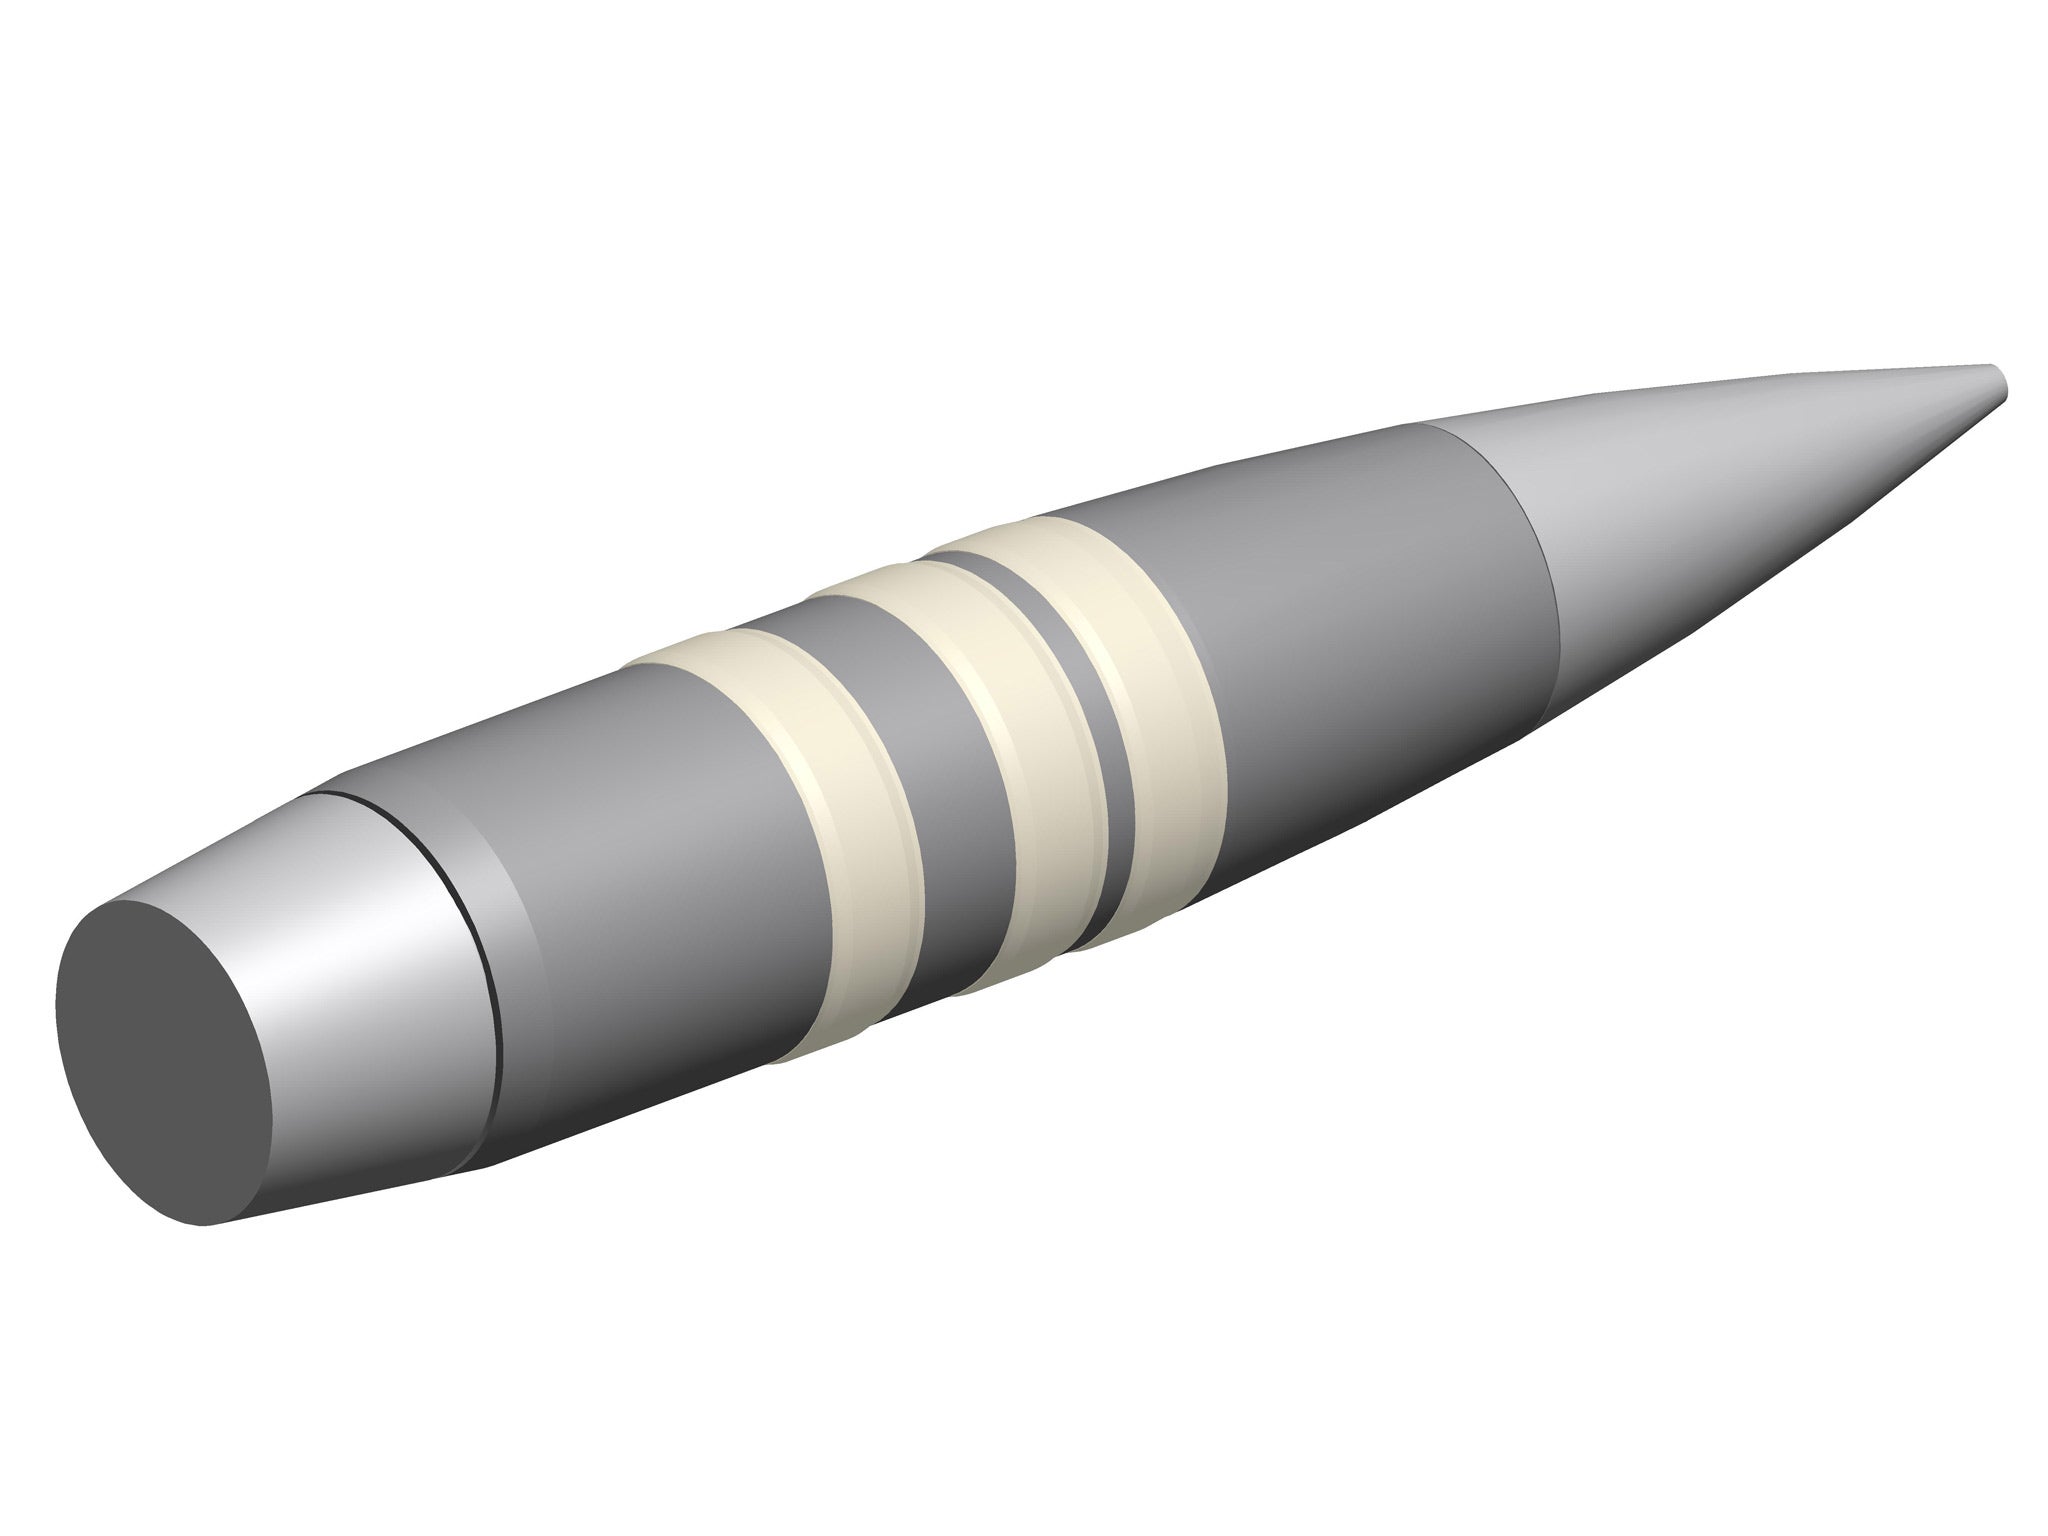 The bullet, as envisioned by Darpa